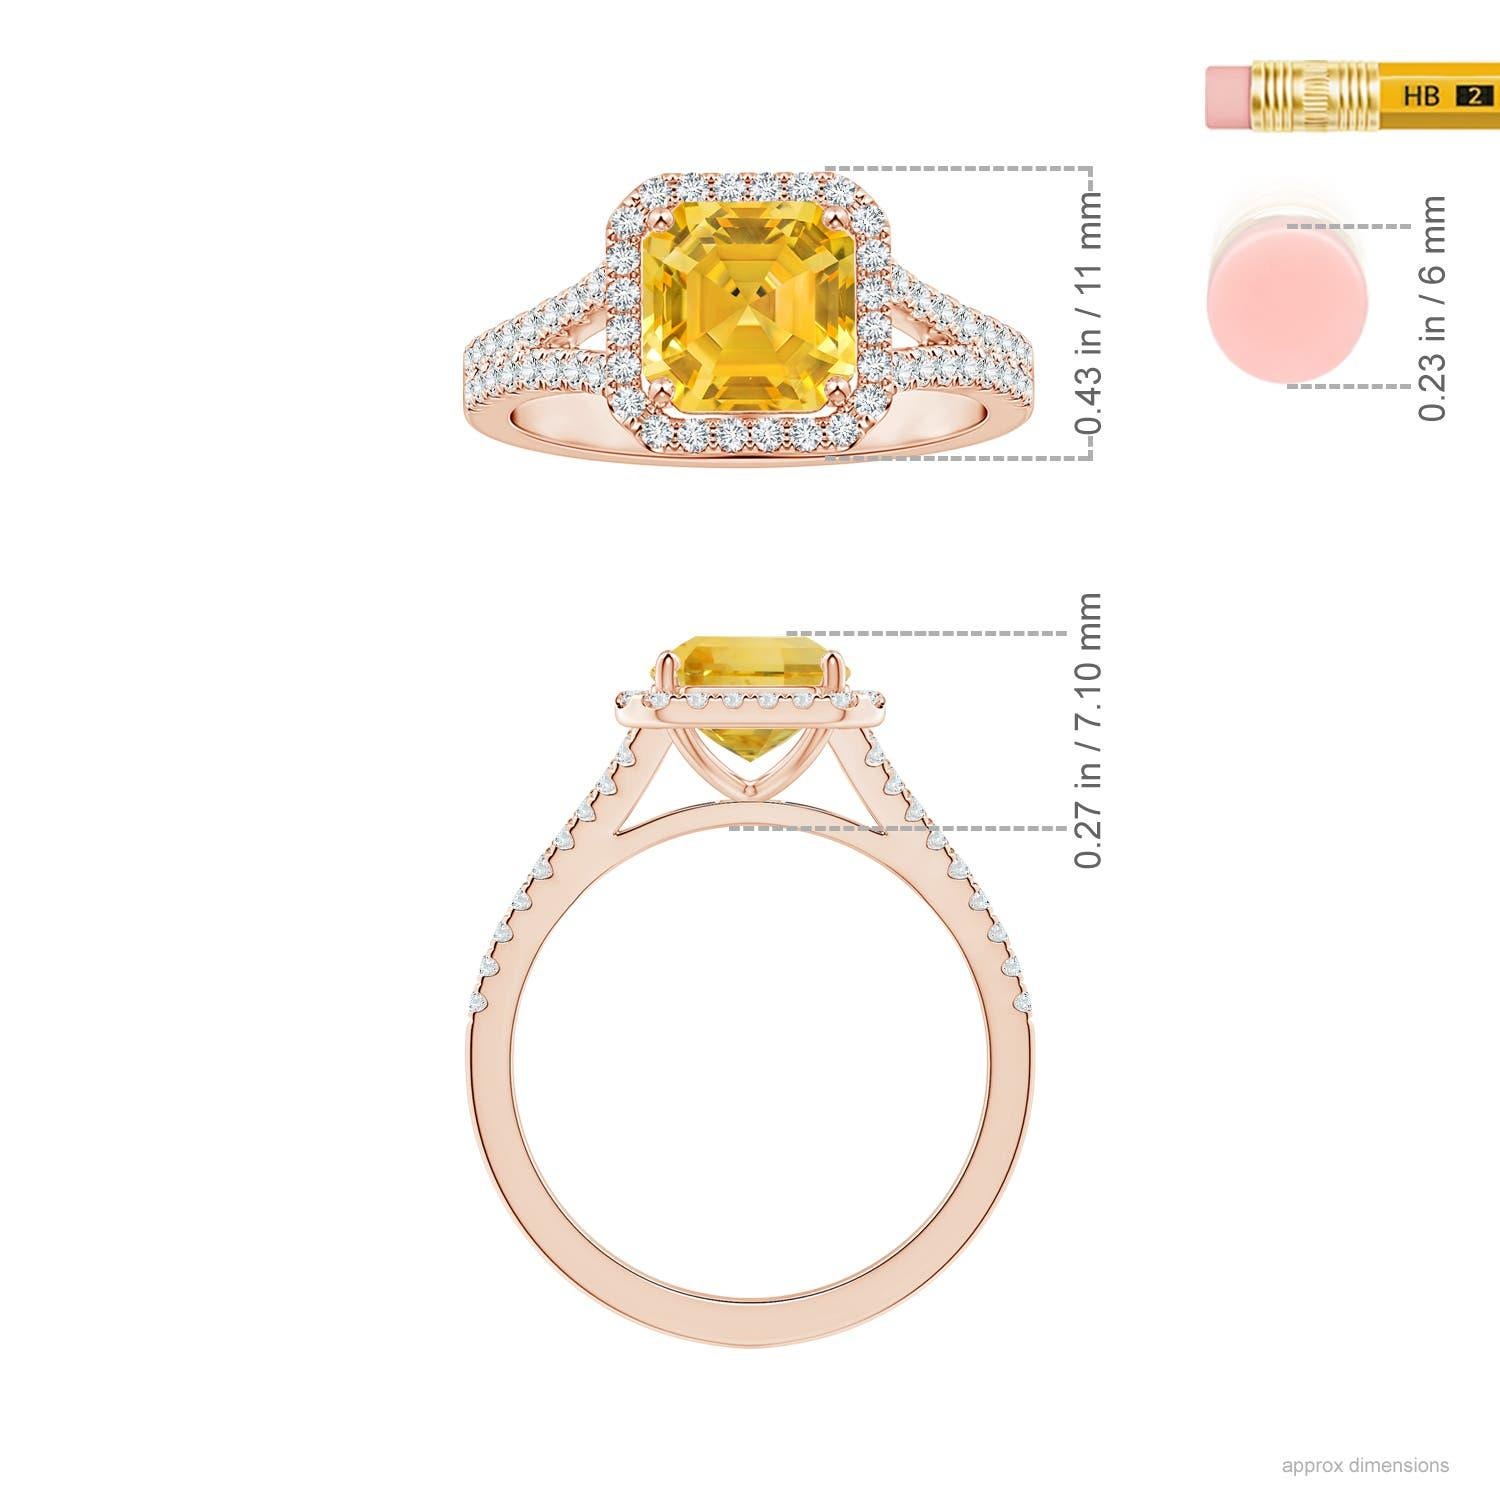 For Sale:  Angara Gia Certified Natural Emerald-Cut Yellow Sapphire Rose Gold Halo Ring 5